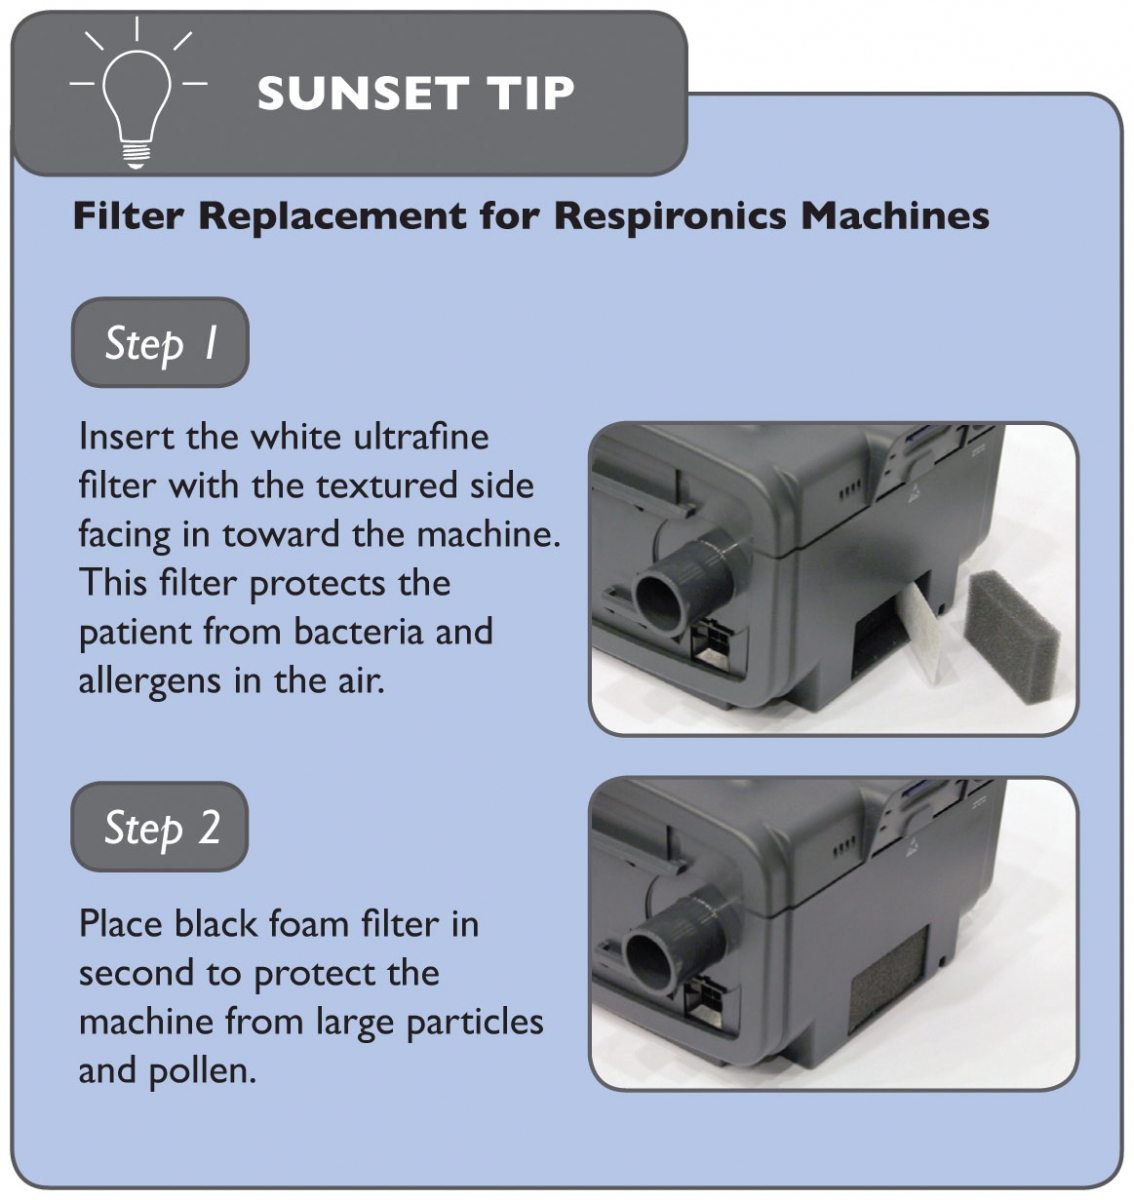 Sunset Healthcare Solutions has created simple patient instructions -- in this case, for replacing filters.